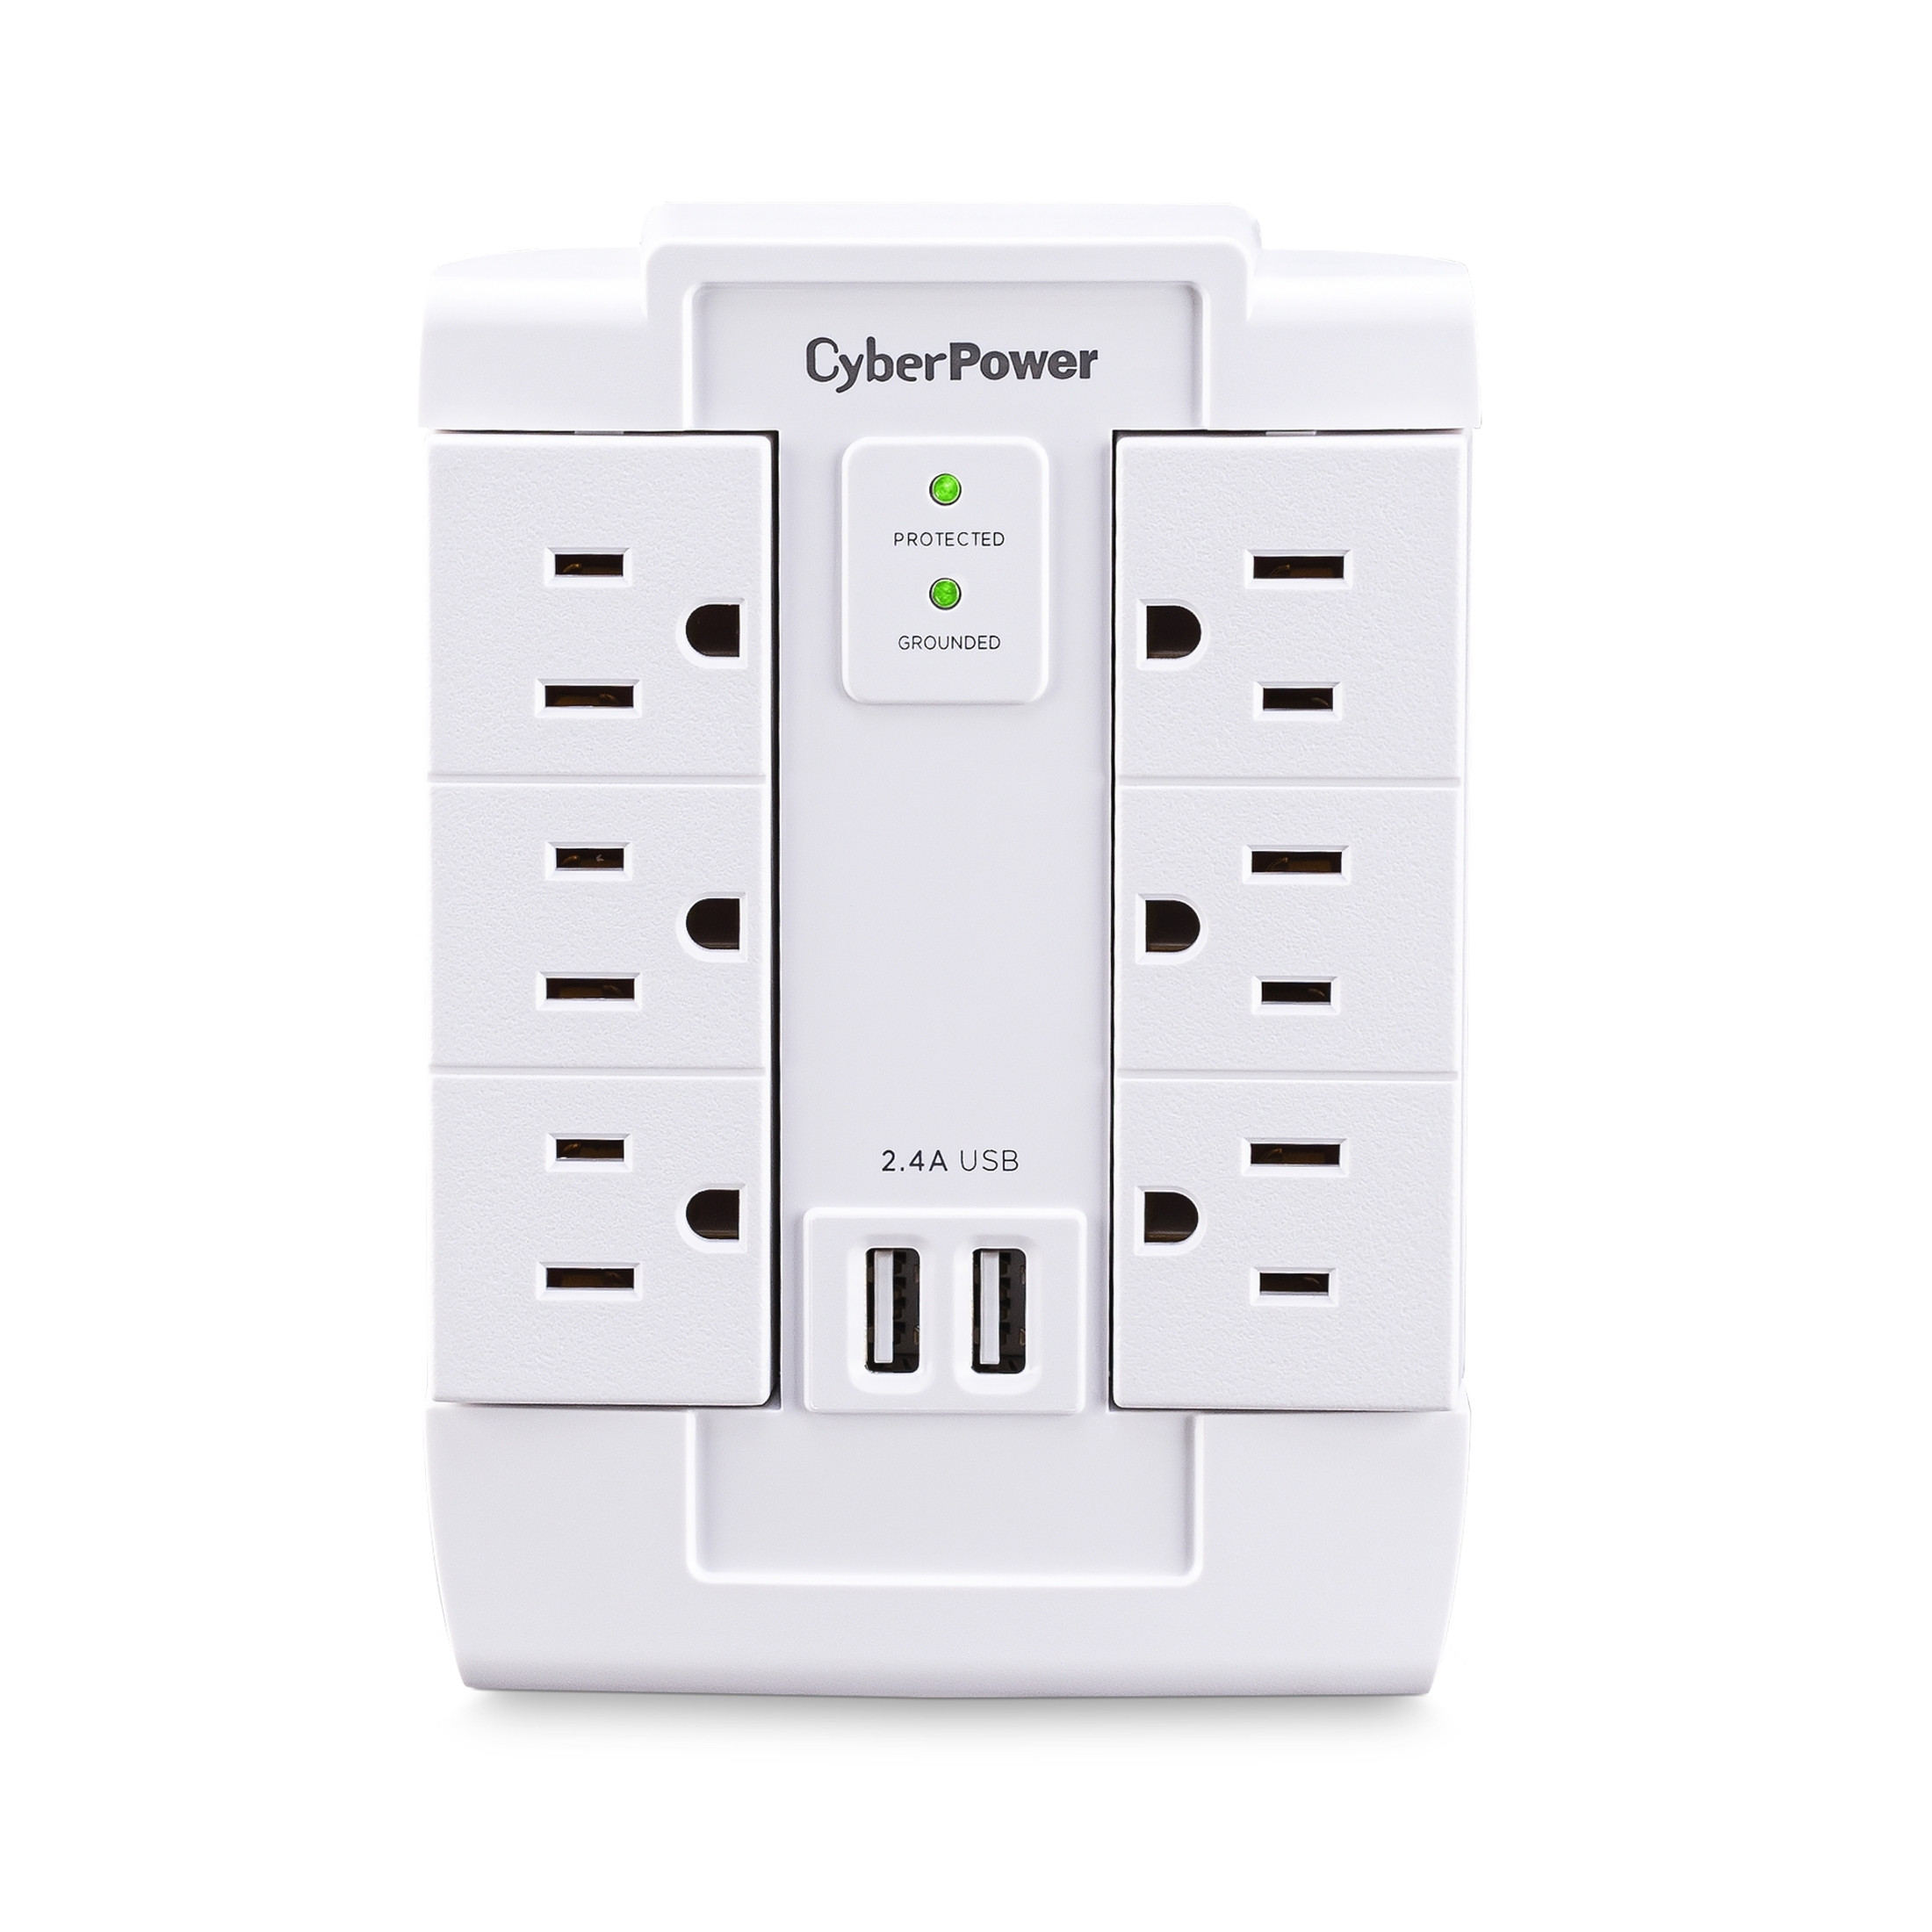 Cyber Power CSP600WSURC2 Professional 6Outlet Surge with 1200 JClamping Voltage 800V, NEMA 5-15P, Wall Tap, 22.4 Amps (Shared) USB,… CSP600WSURC2